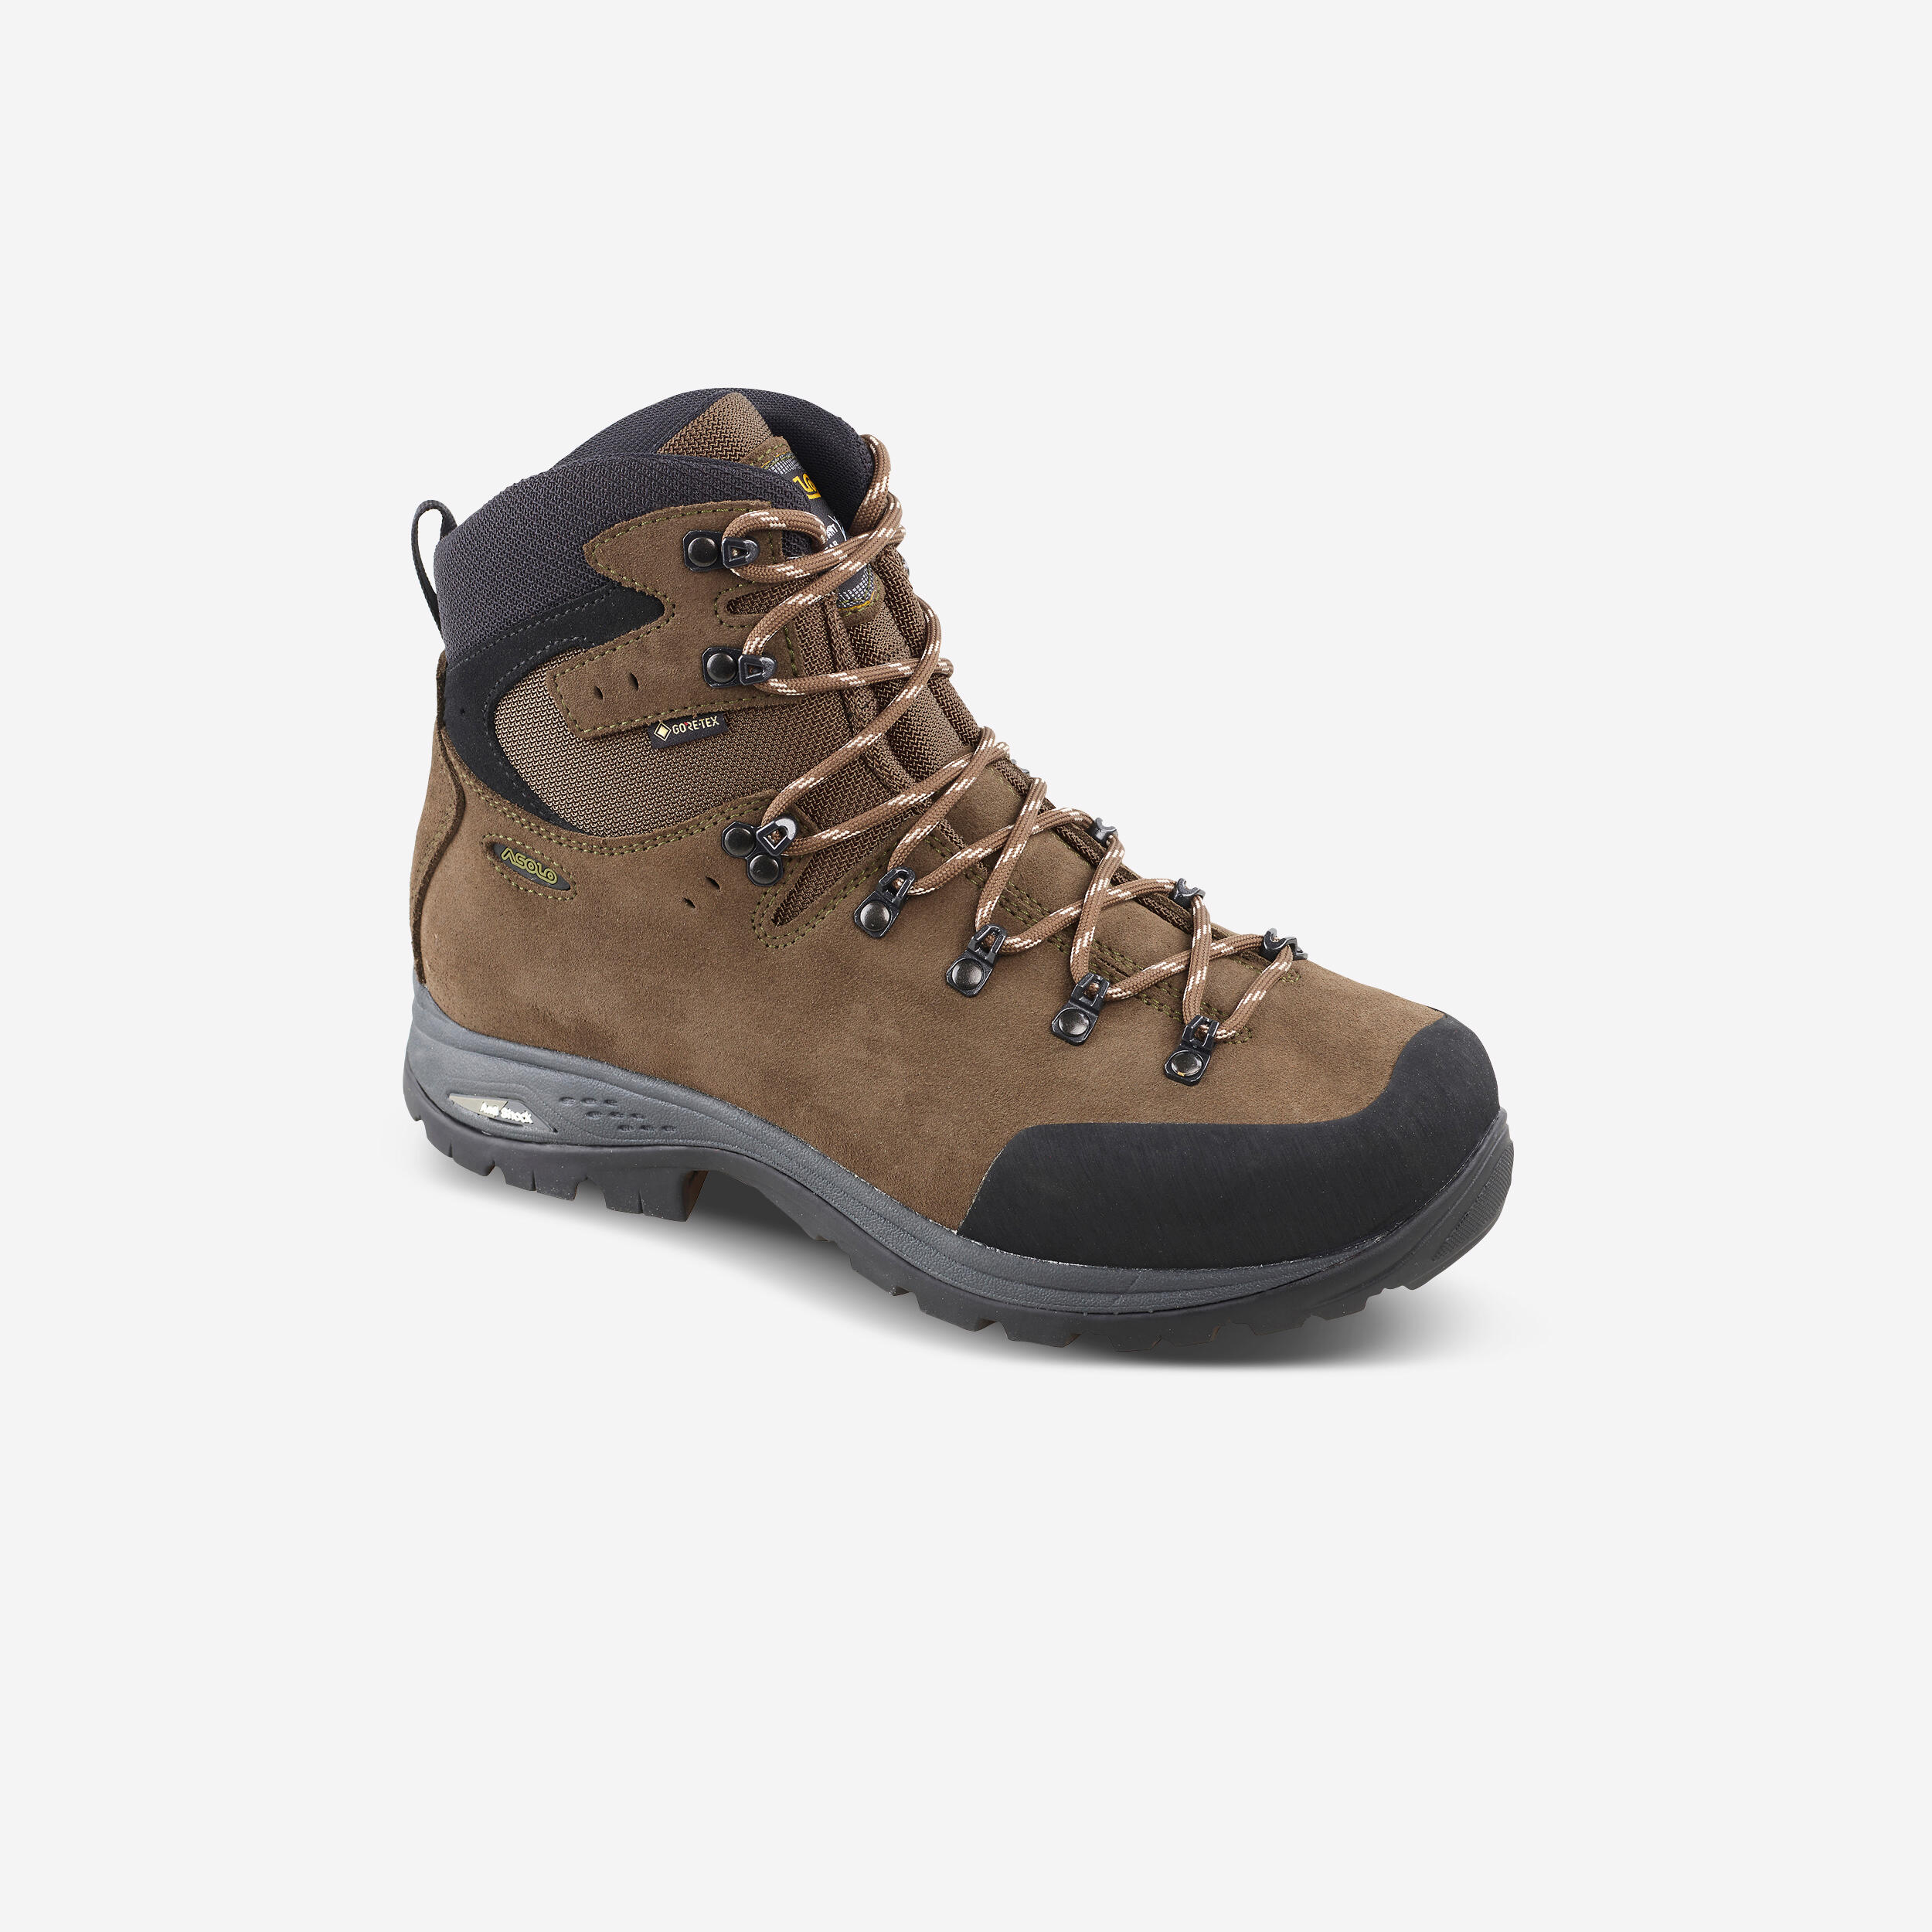 Waterproof Hunting Boots Asolo X-hunt Forest Gore-tex Vibram